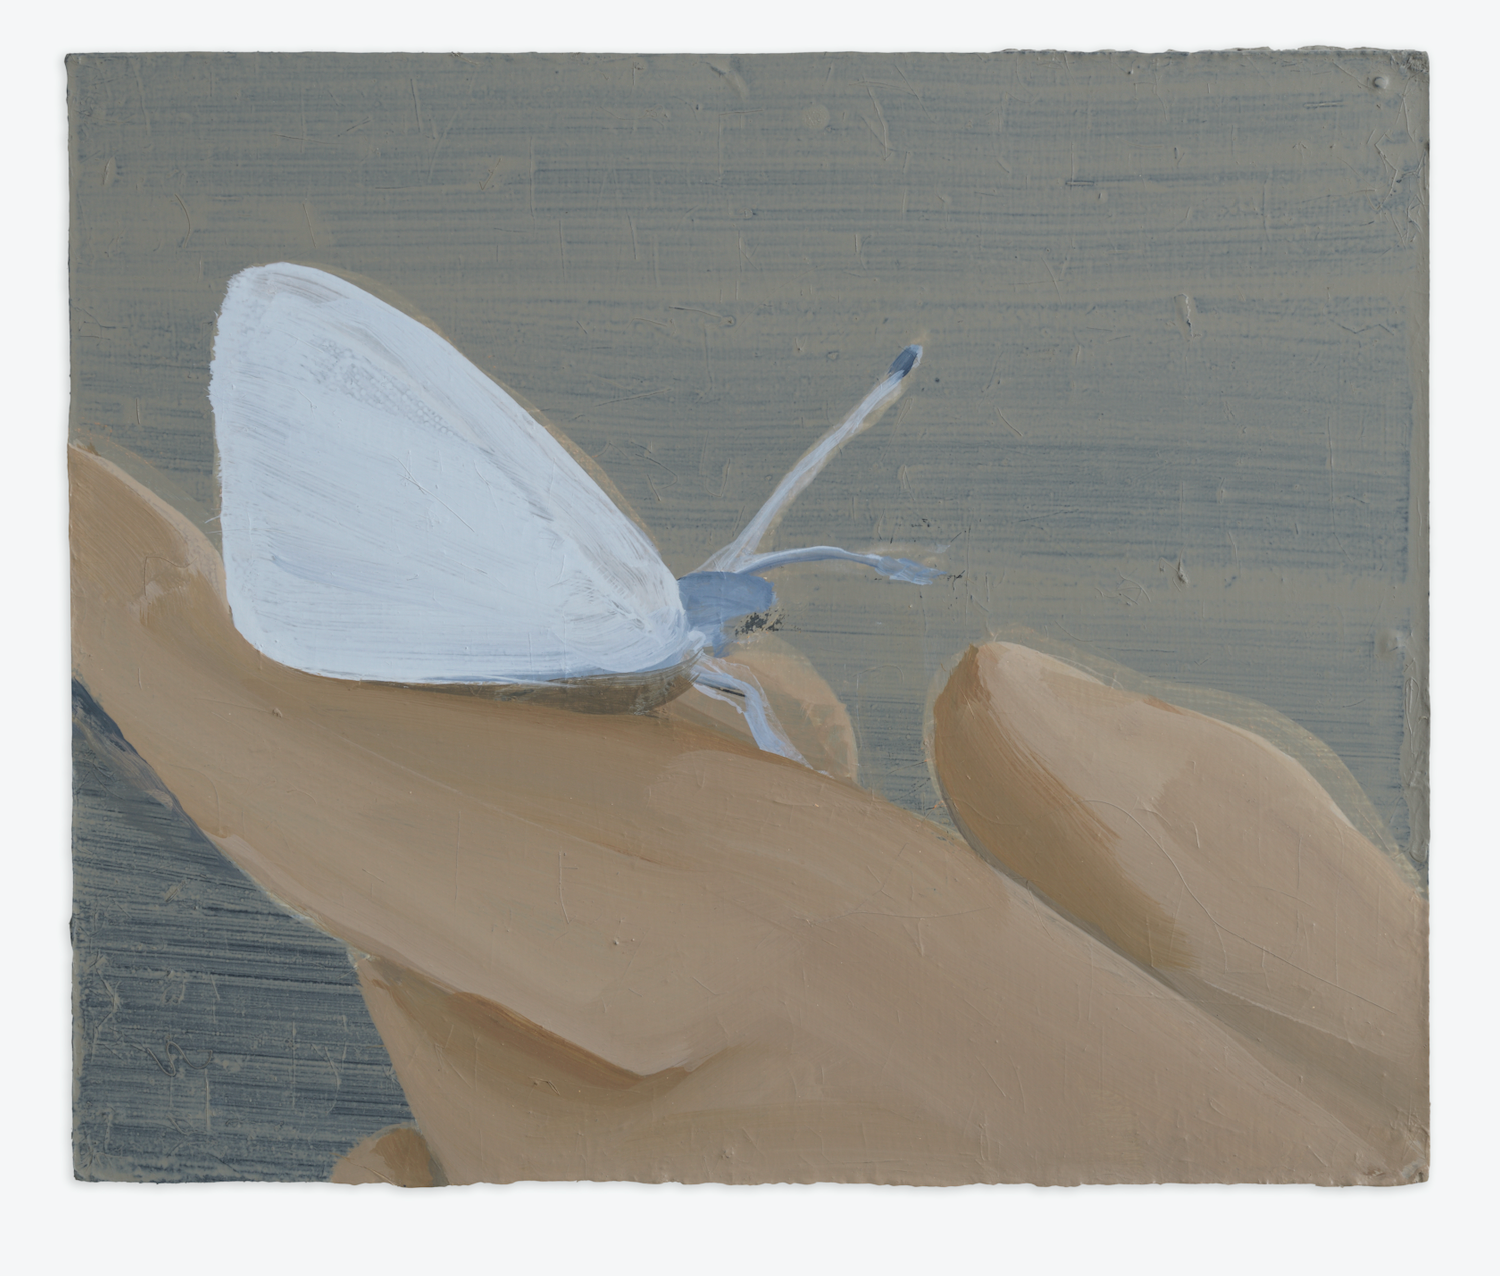 Butterfly on finger by Miho Sato